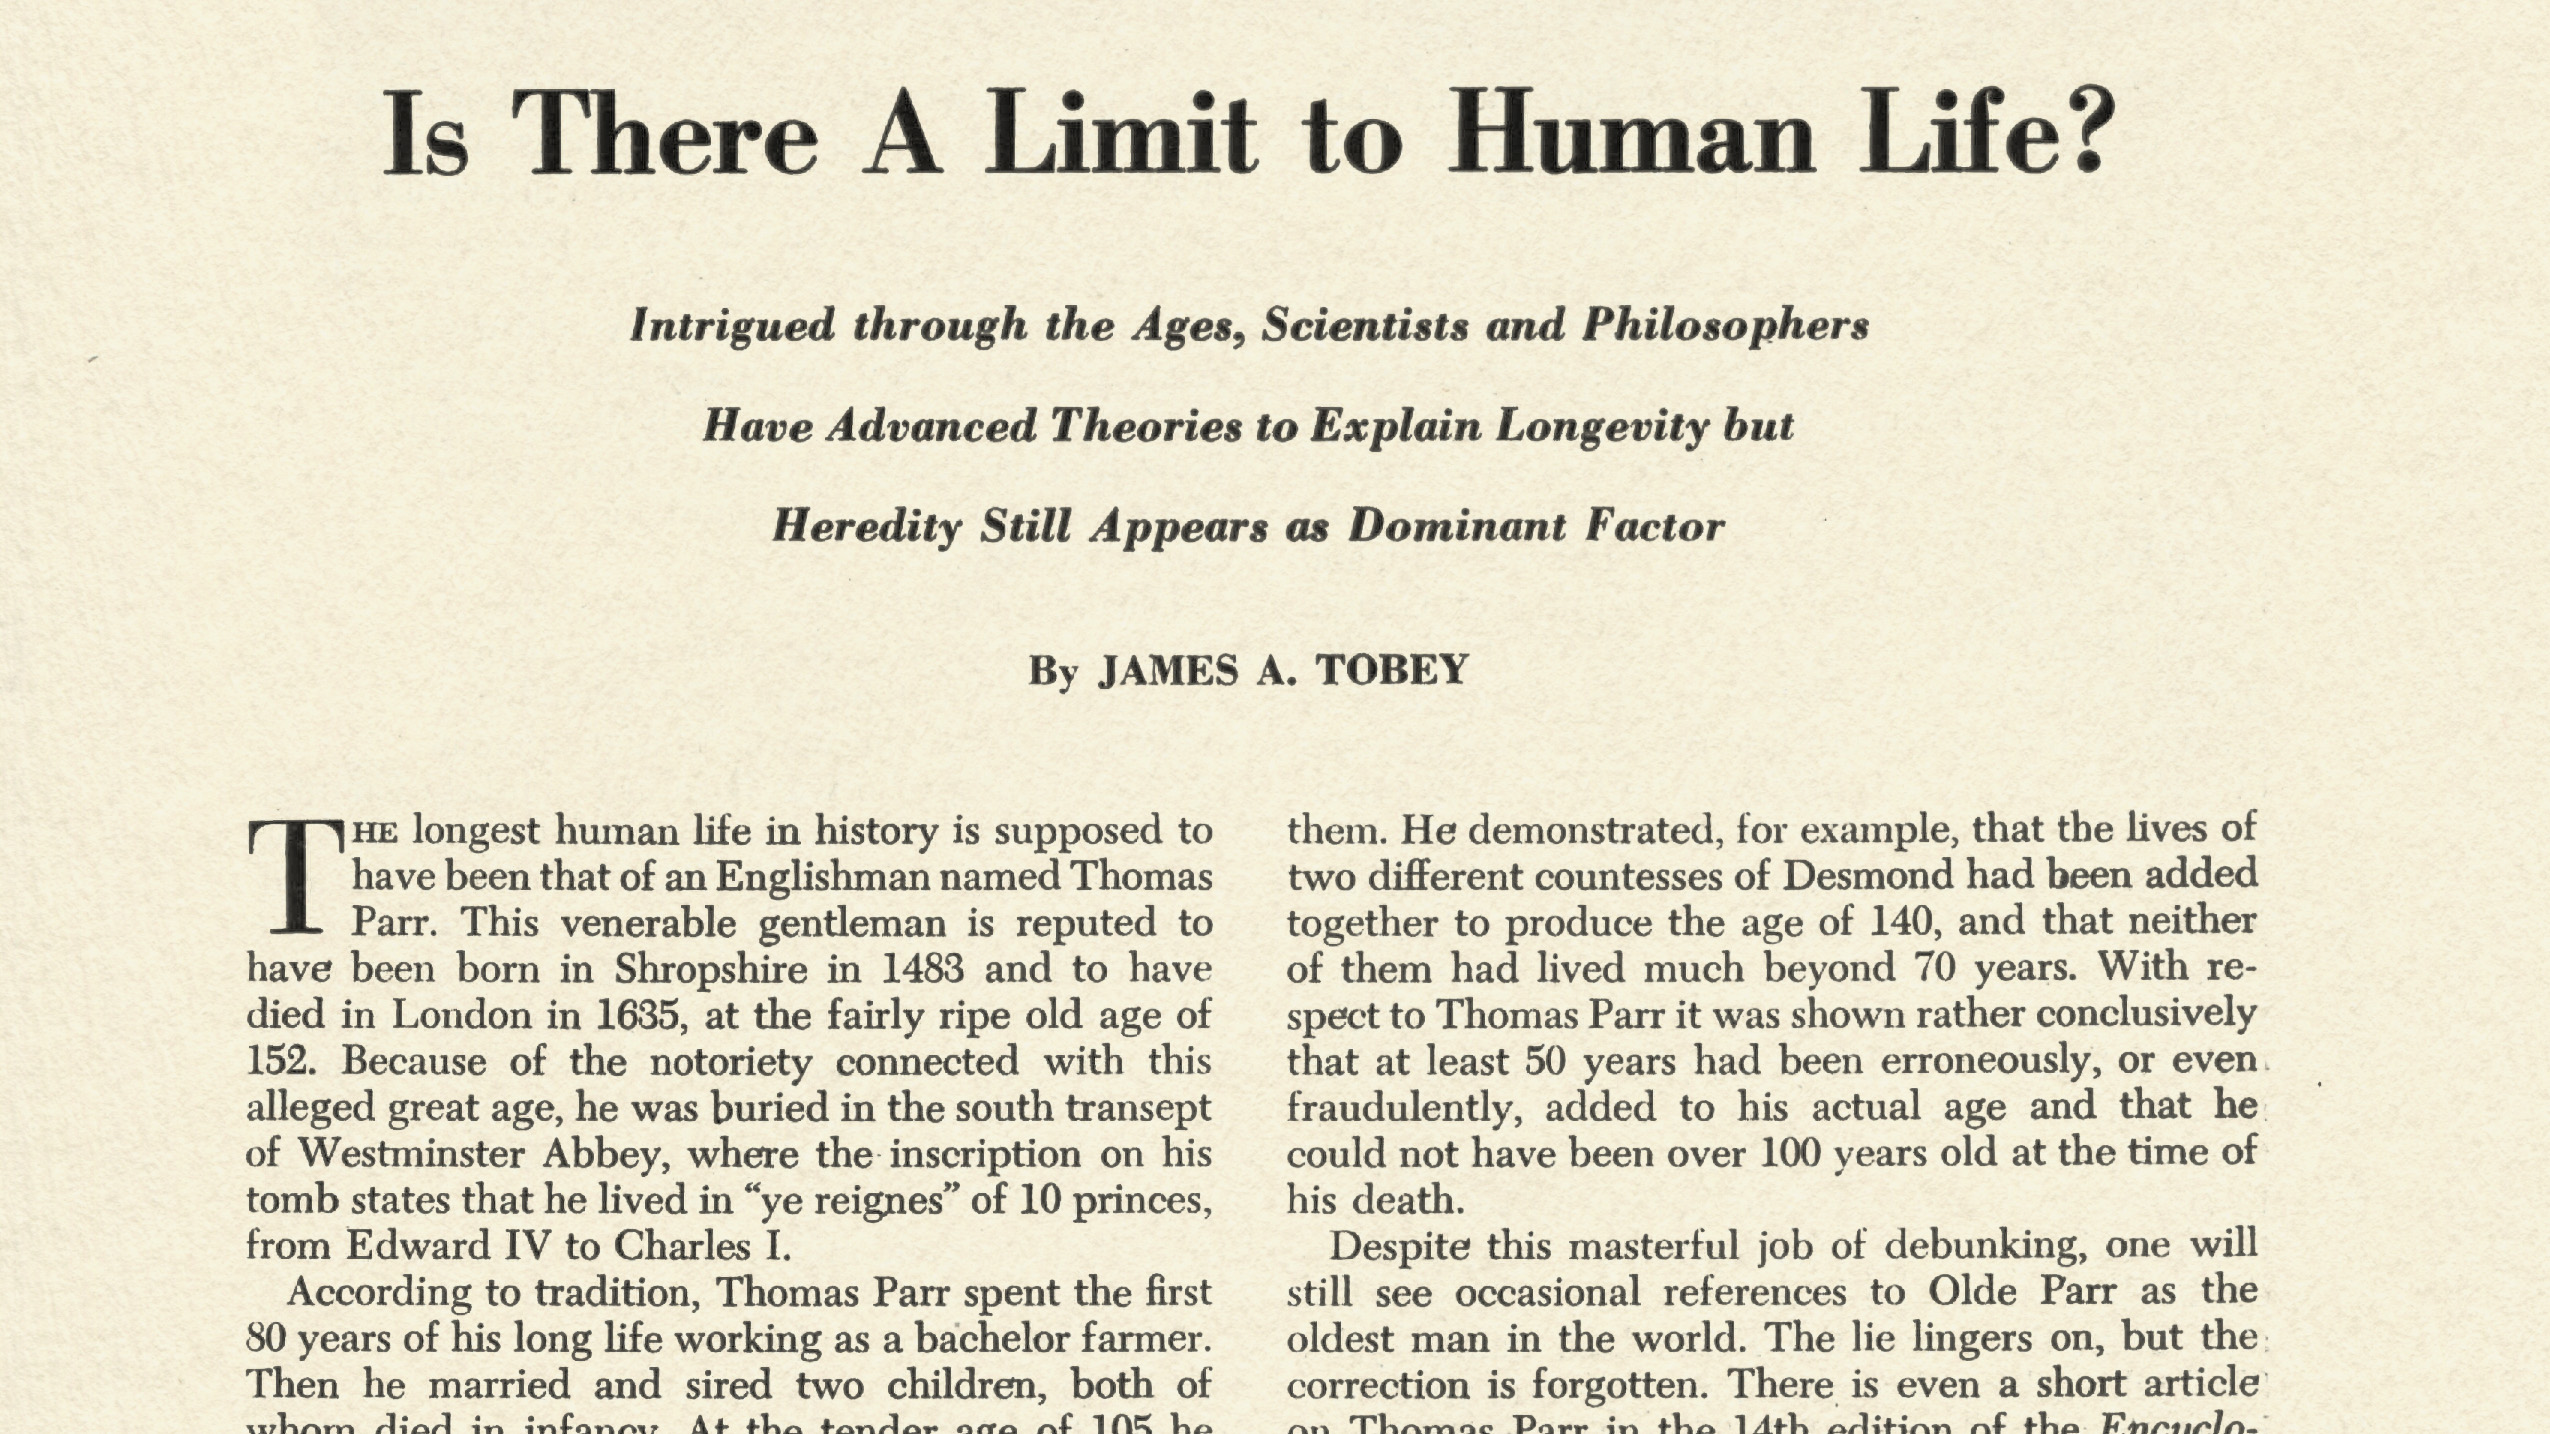 Top of an old article by James A. Tobey entitled &quot;Is There A Limit to Human Life?&quot;